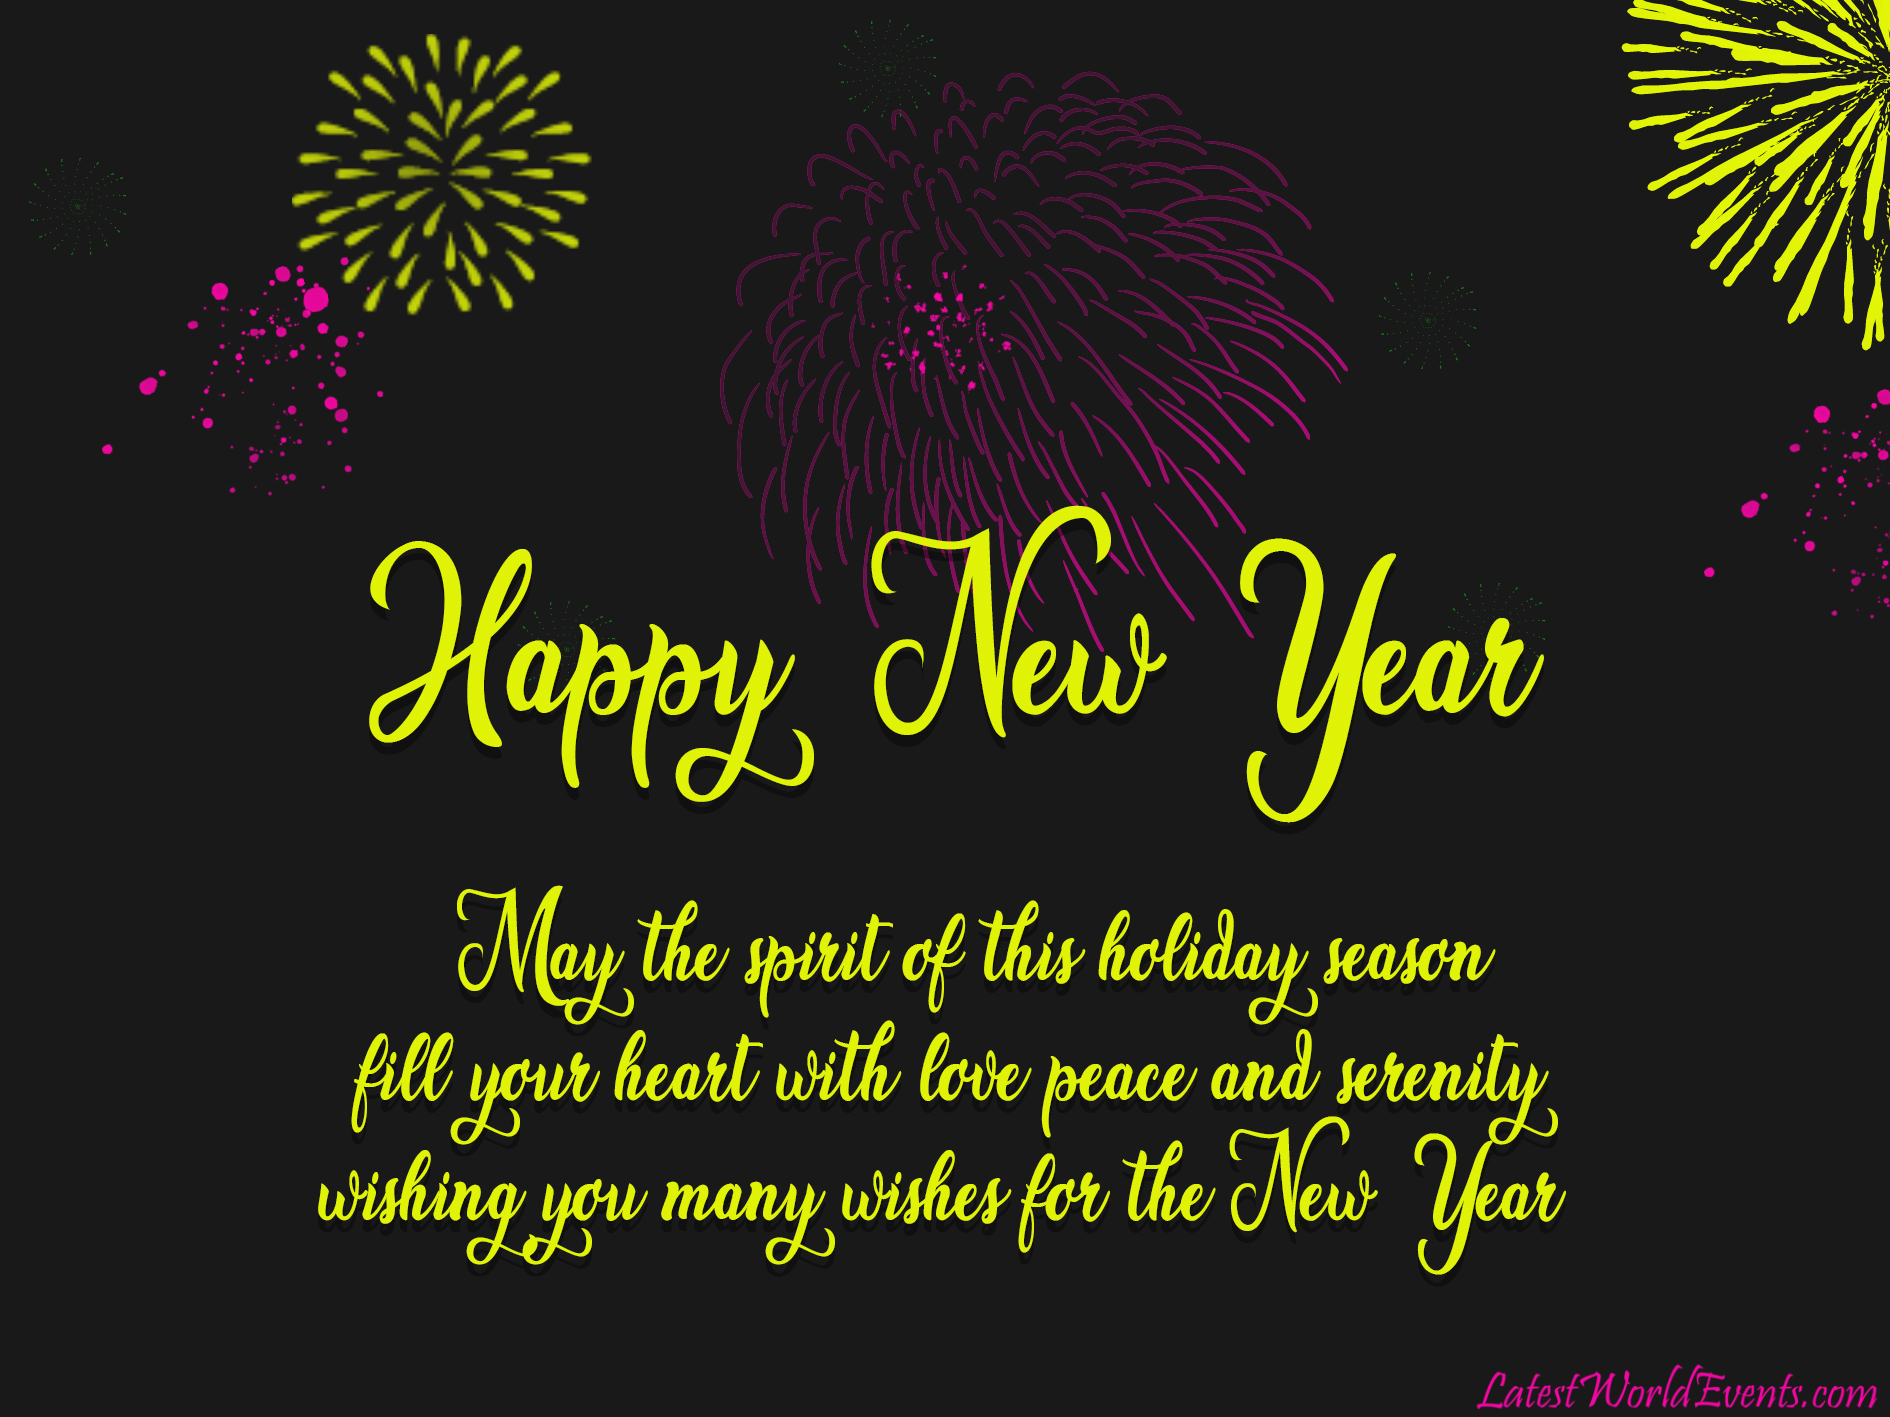 Download-happy-new-year-in-advance-card